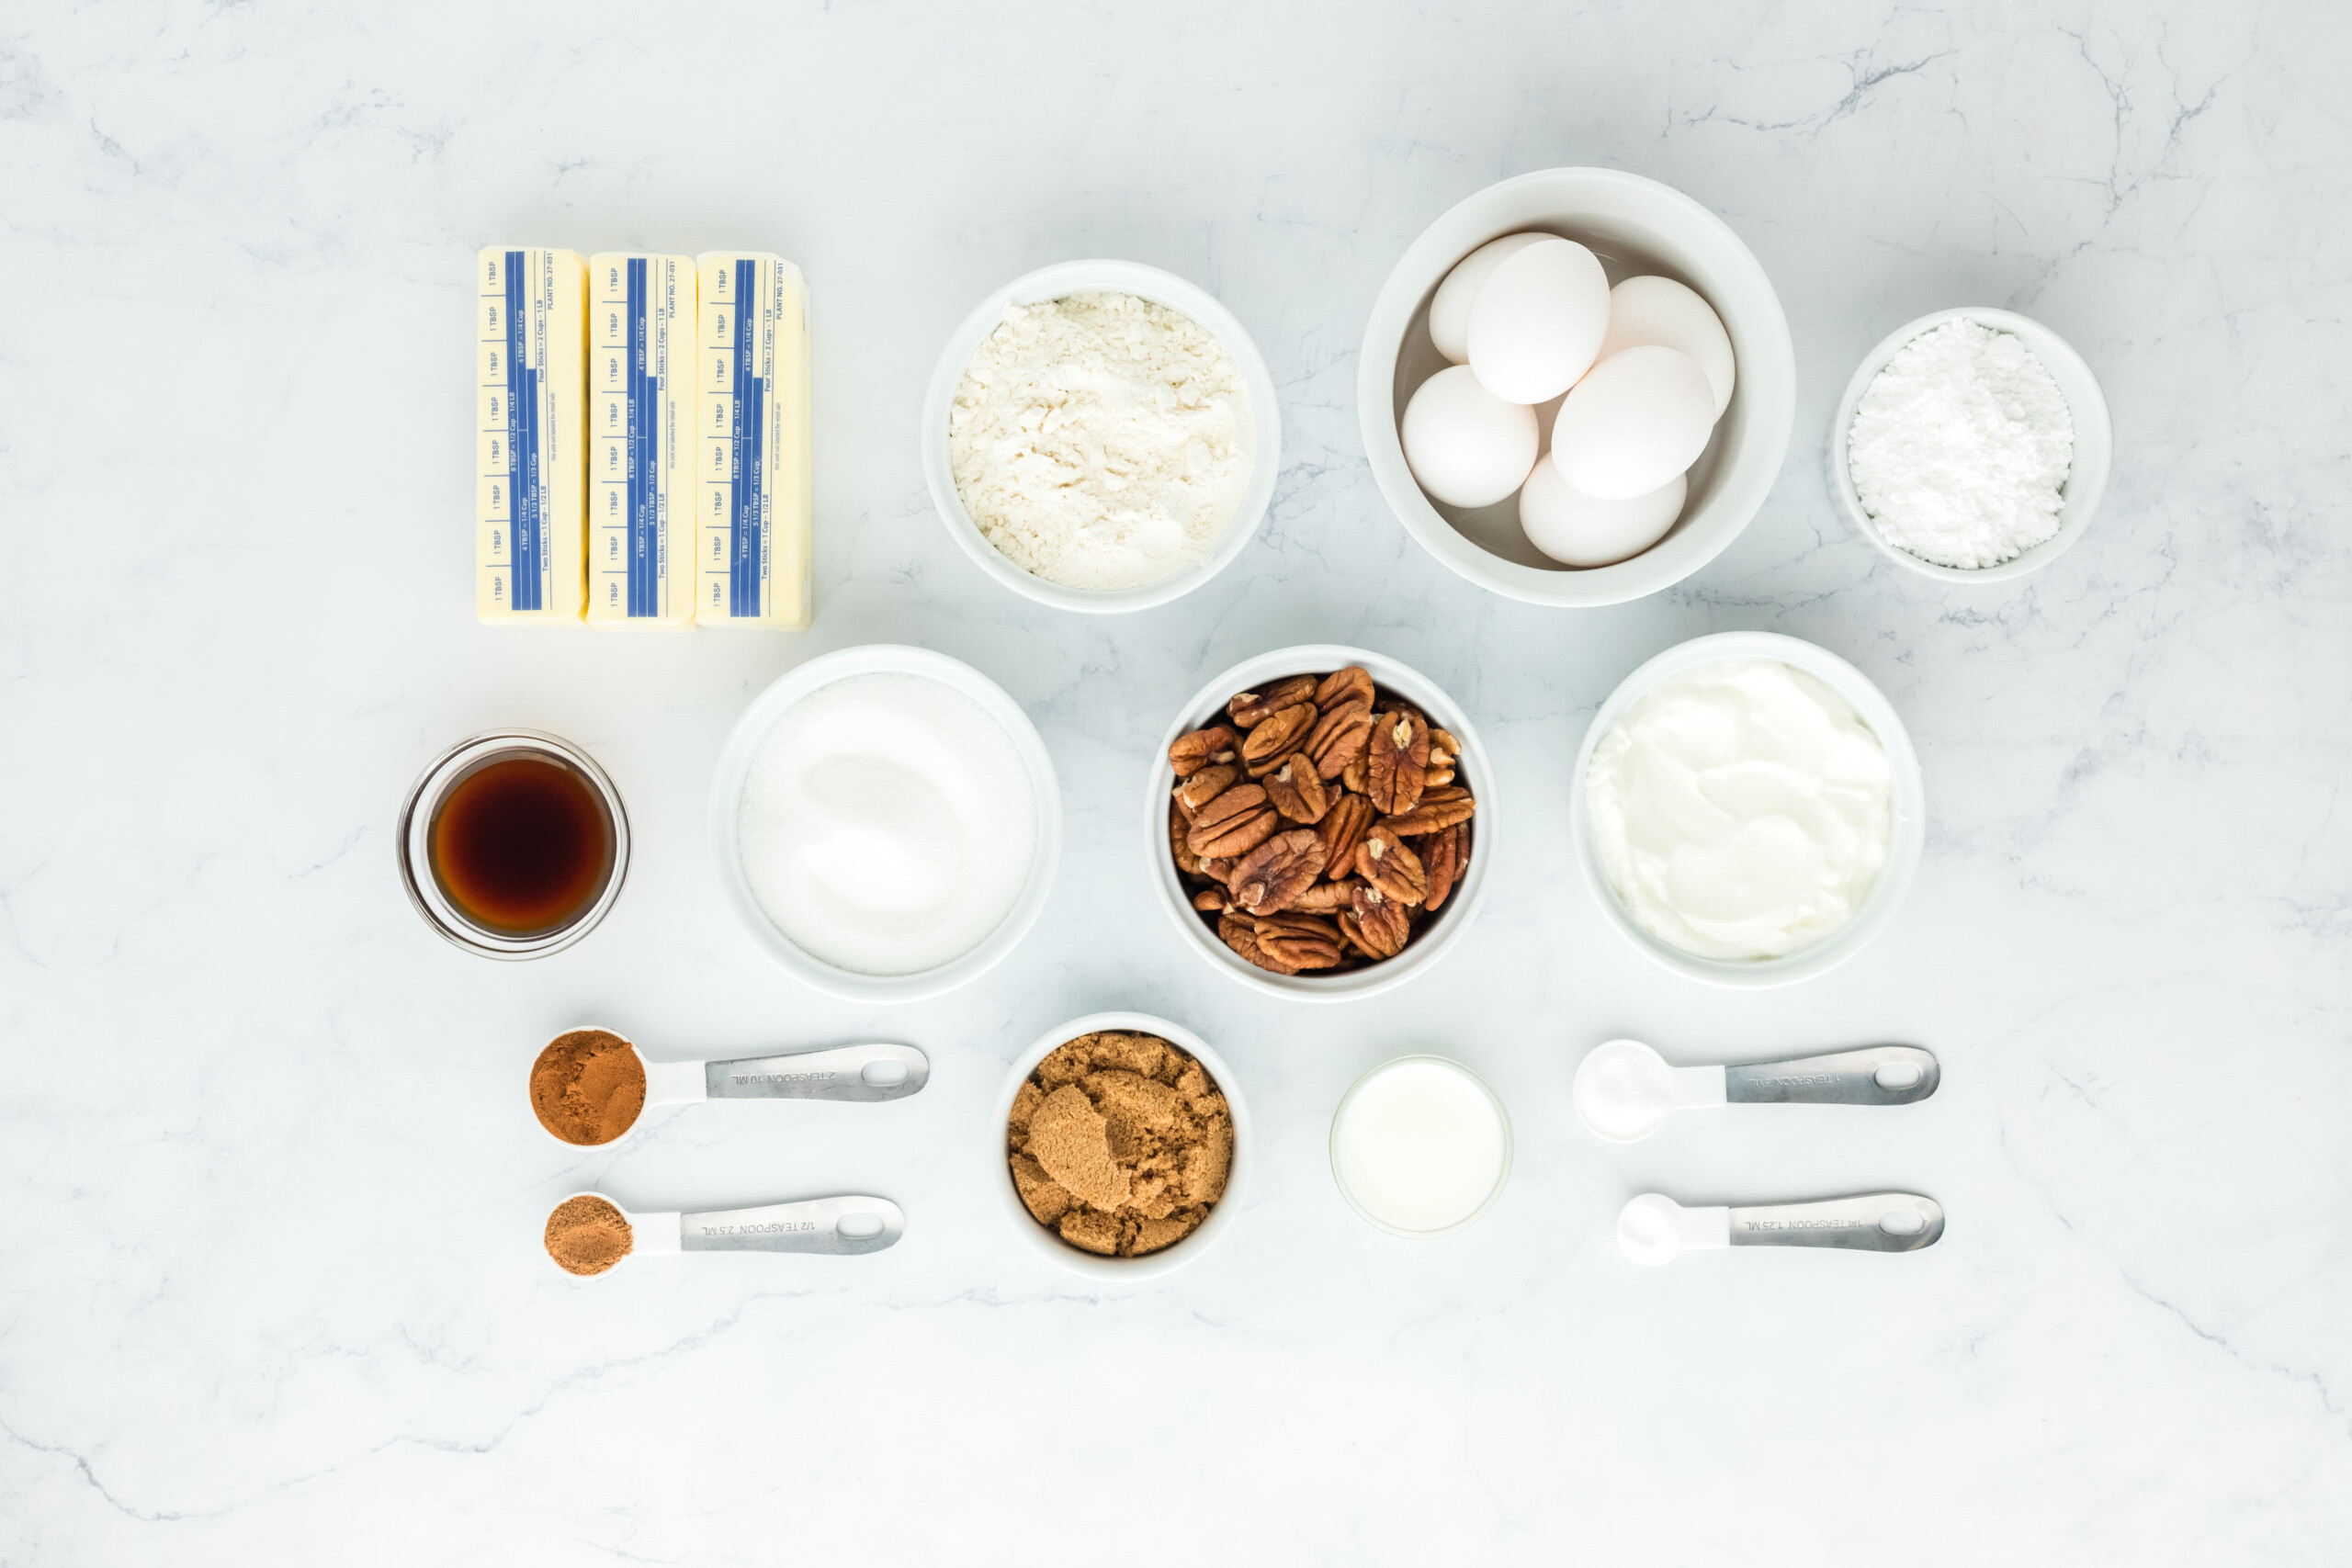 Eggs, pecans, butter, vanilla, flour, sugar and other ingredients in white bowls on a white background for baking